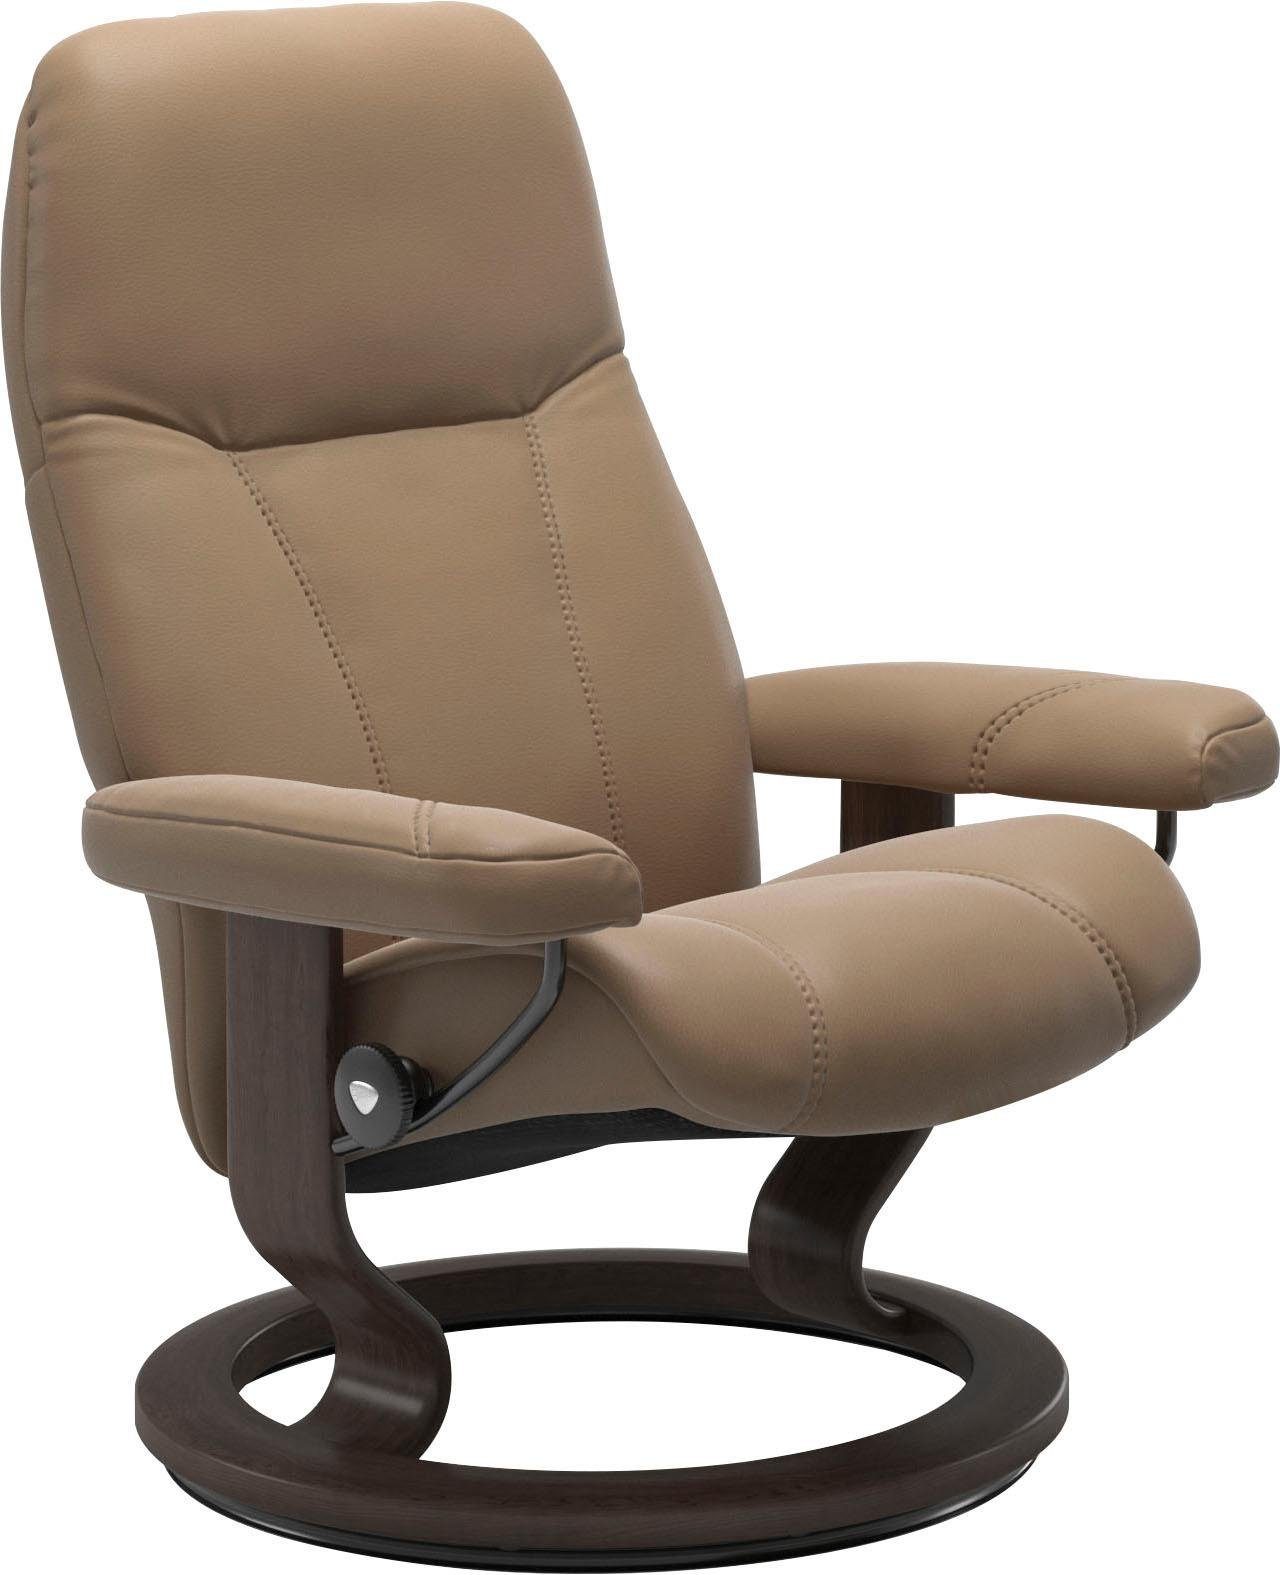 Gestell Wenge Consul, Größe M, Classic Stressless® Relaxsessel mit Base,